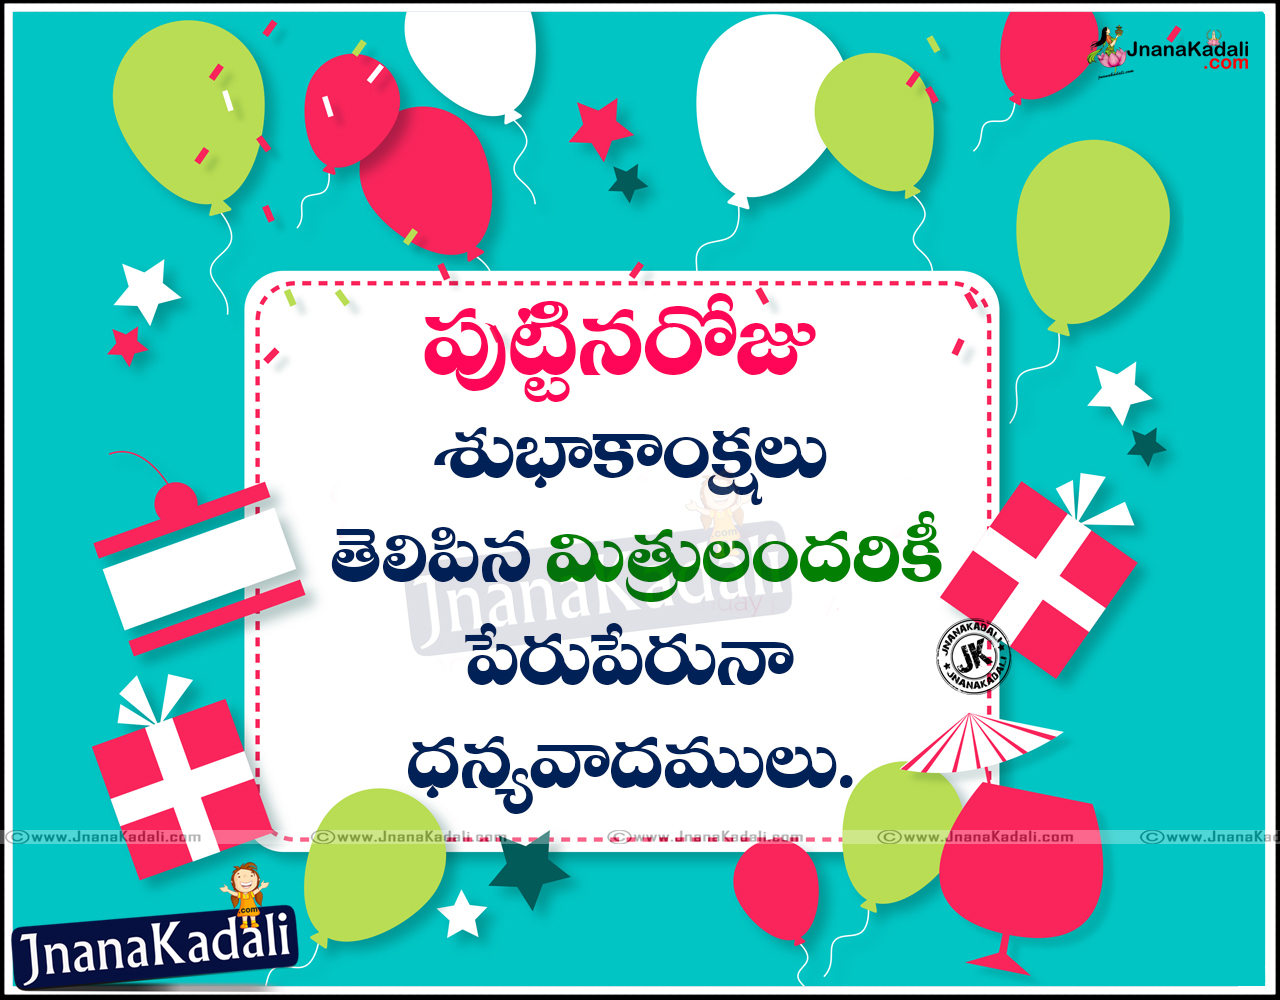 Best Telugu Self Birthday Quotations and Thanks for All Images ...